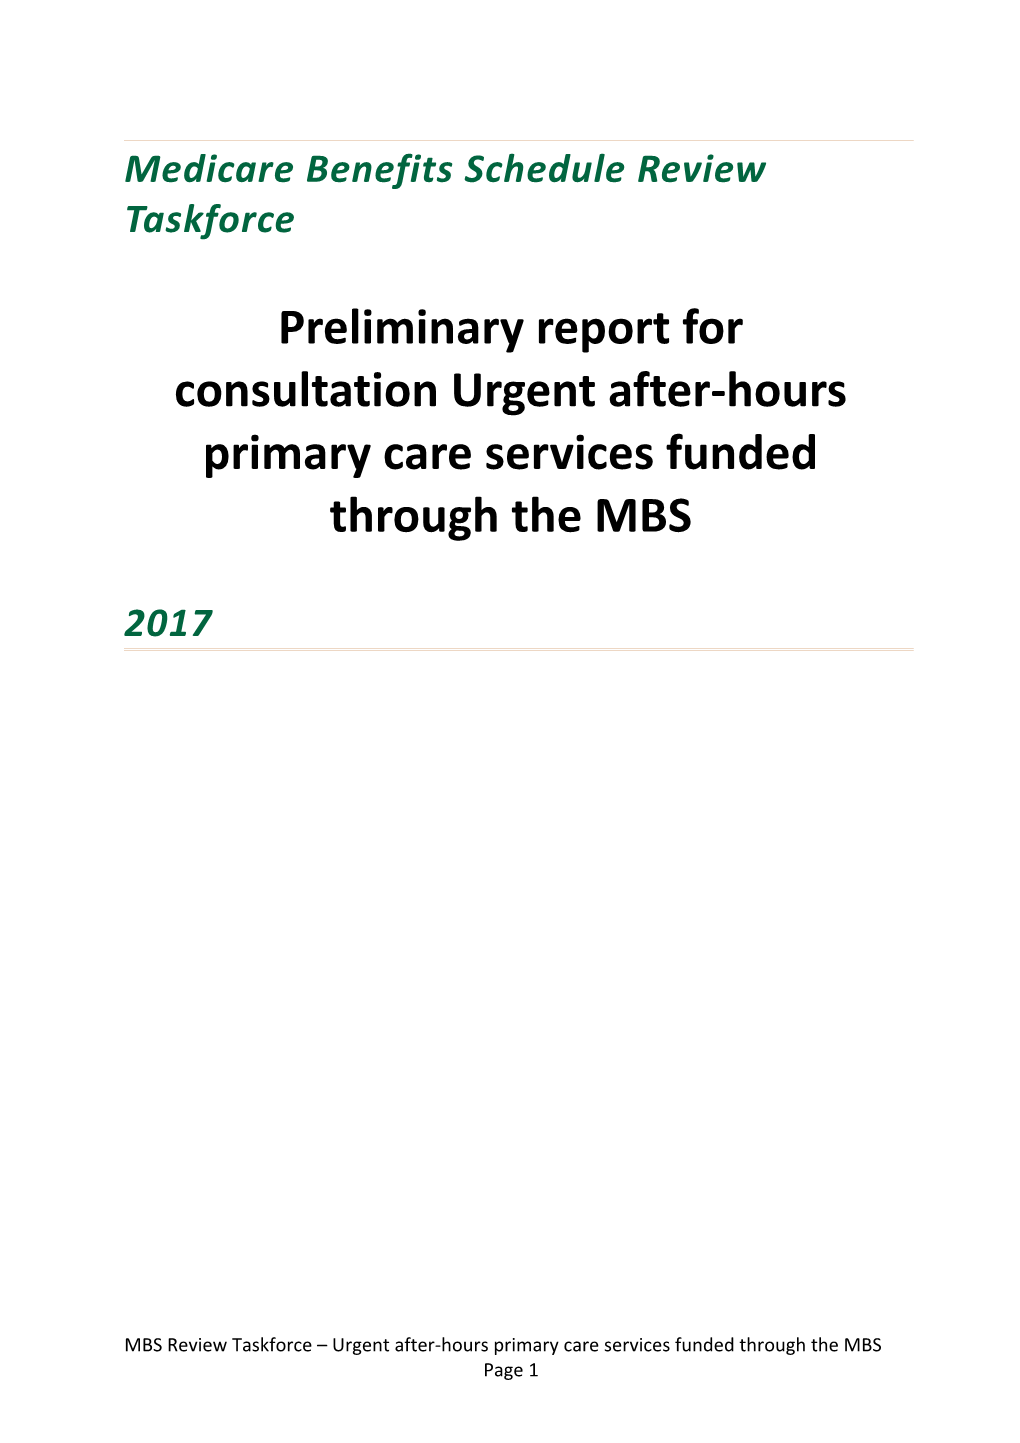 Preliminary Report for Consultation Urgent After-Hours Primary Care Services Funded Through